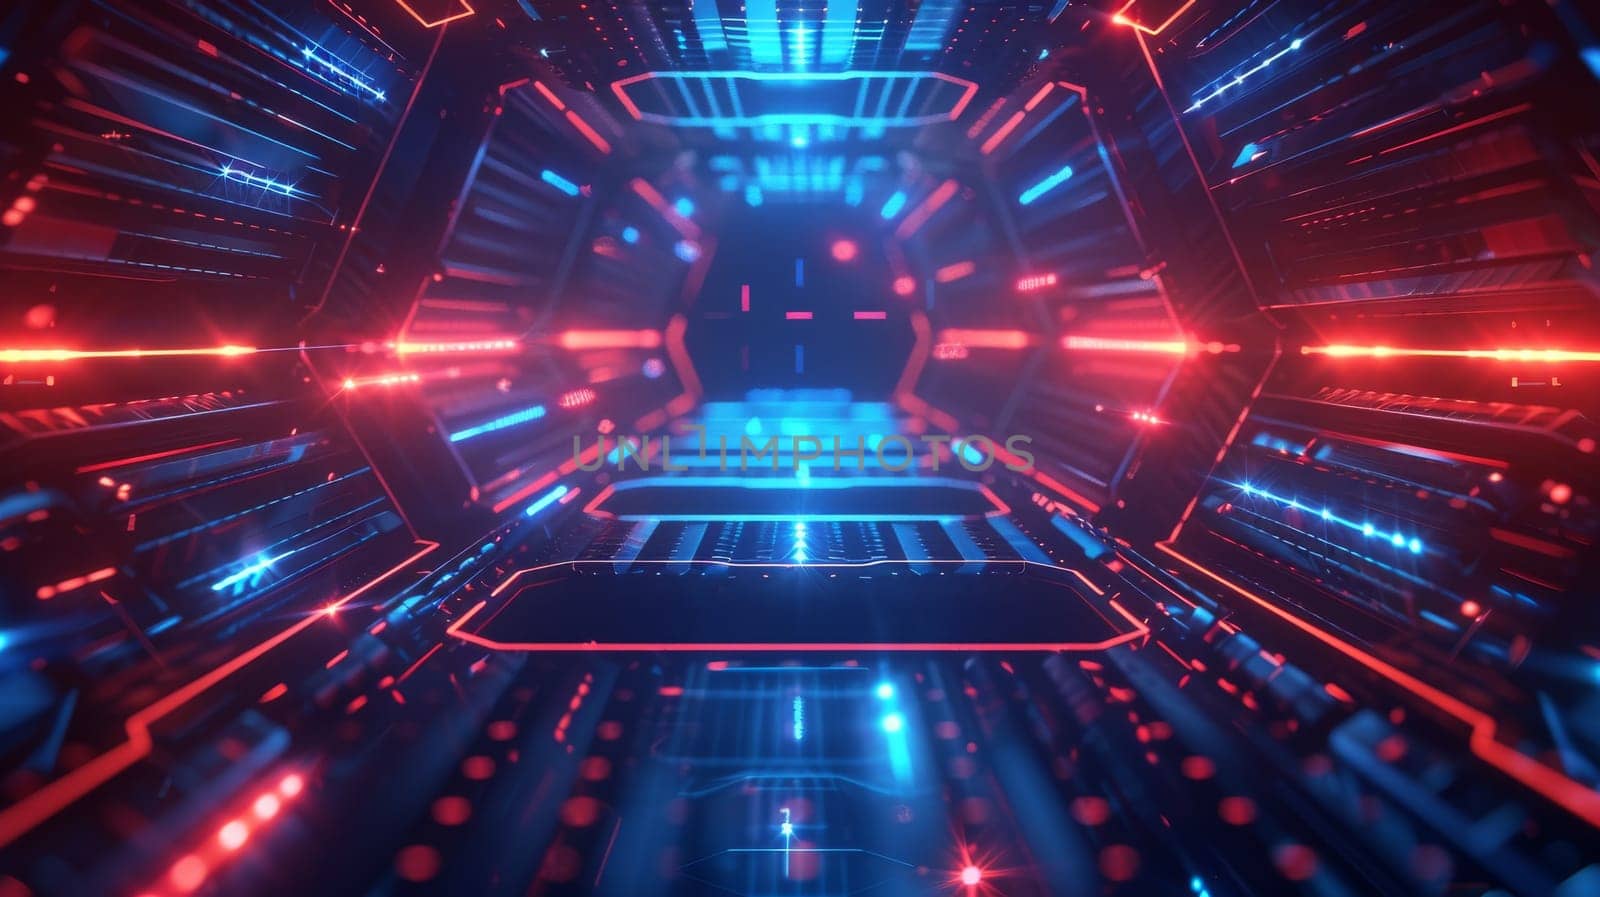 A futuristic tunnel with neon lights and a blue and red color scheme. The tunnel is filled with wires and circuits, giving it a futuristic and technological feel